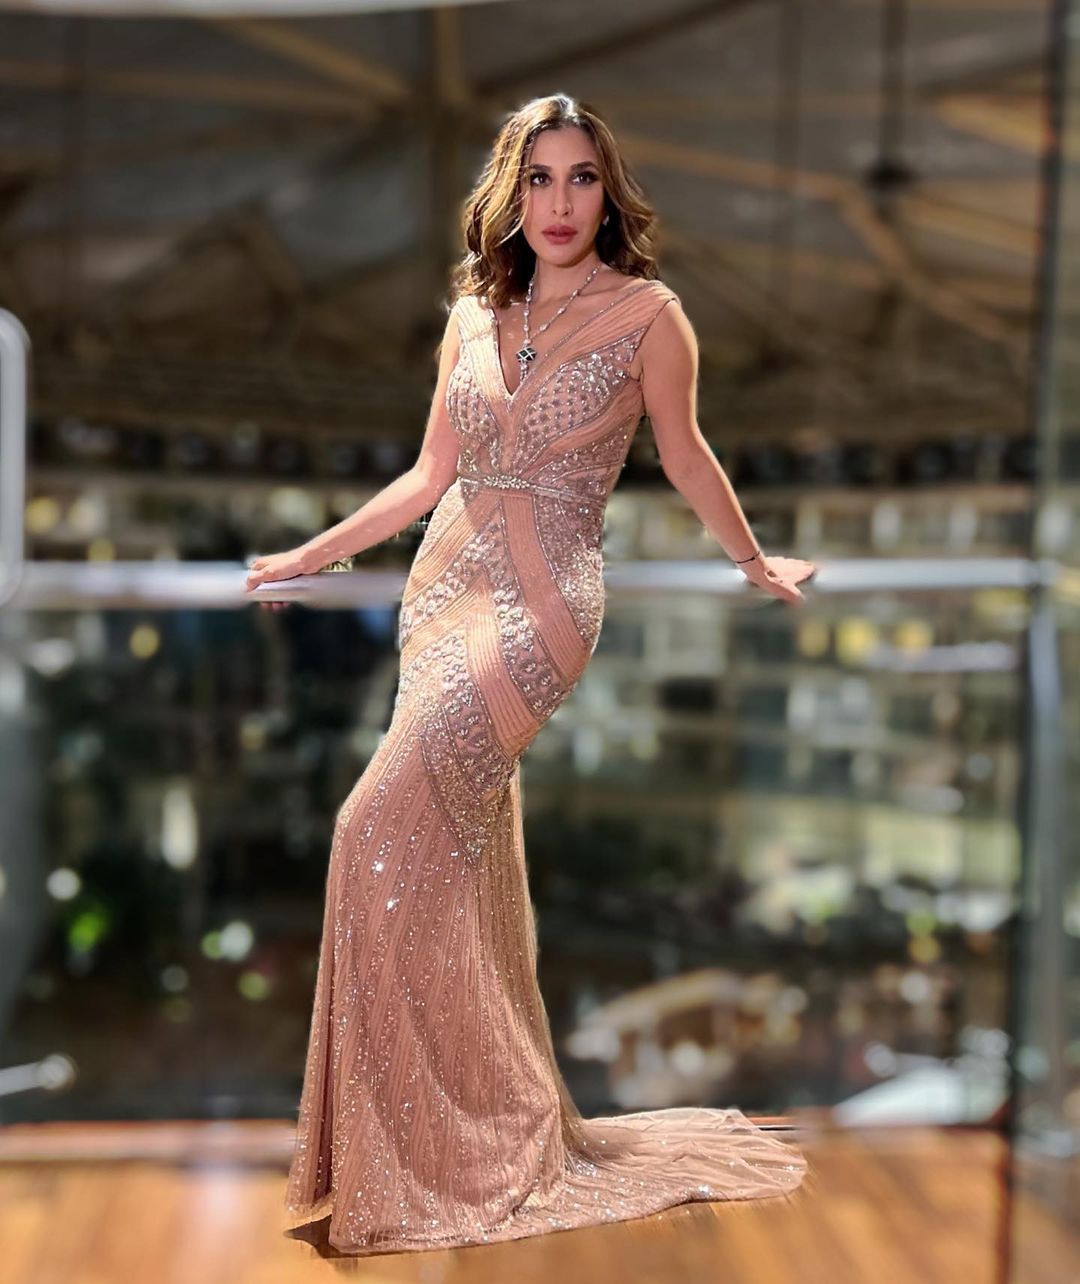 Sophie Choudry paints an elegant picture in the nude gown